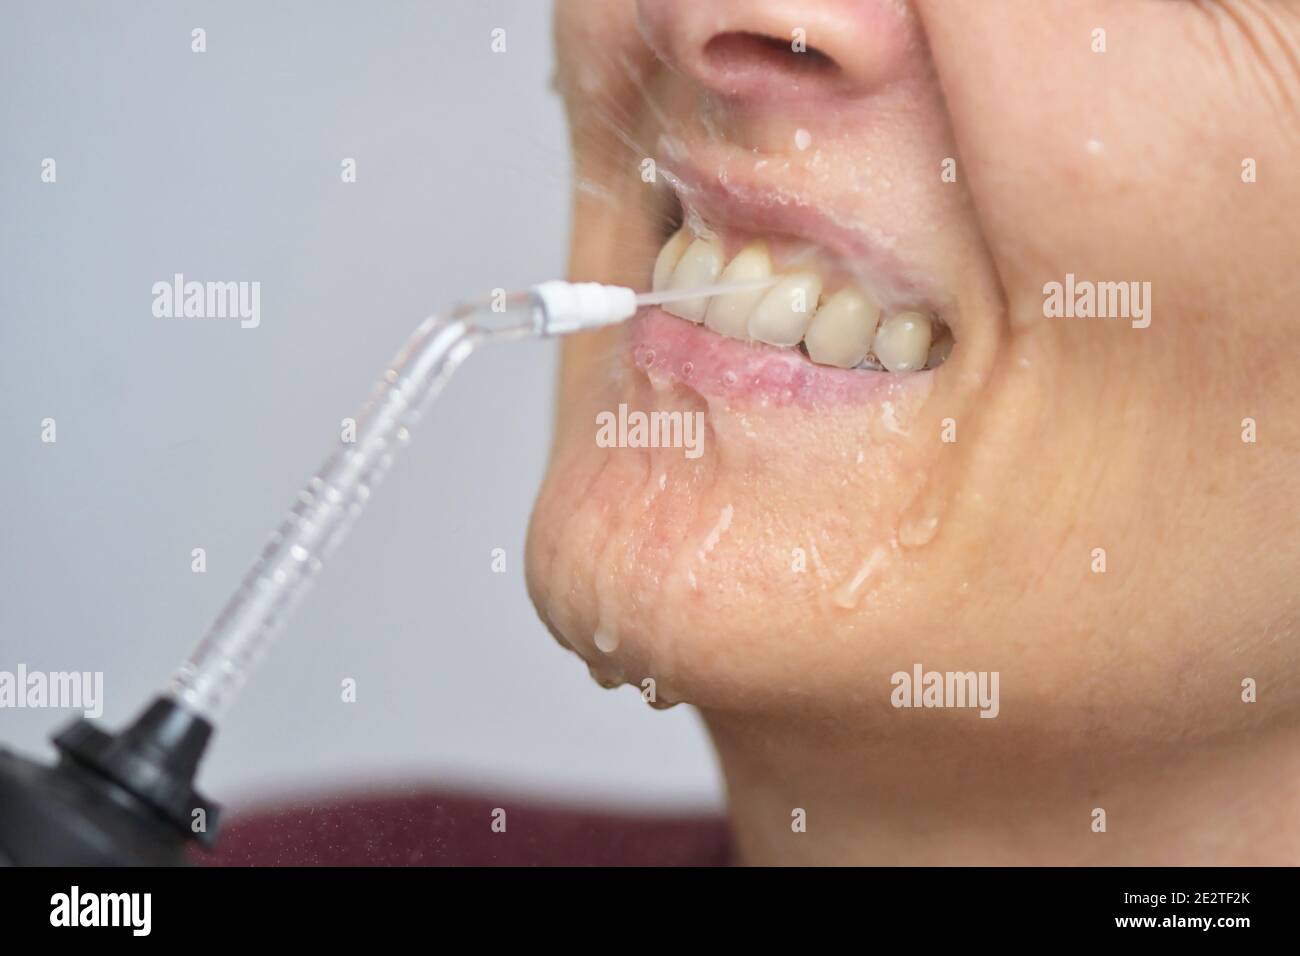 Portrait Of A Young Womanand and Professional Oral Irrigator or Flosser Stock Photo